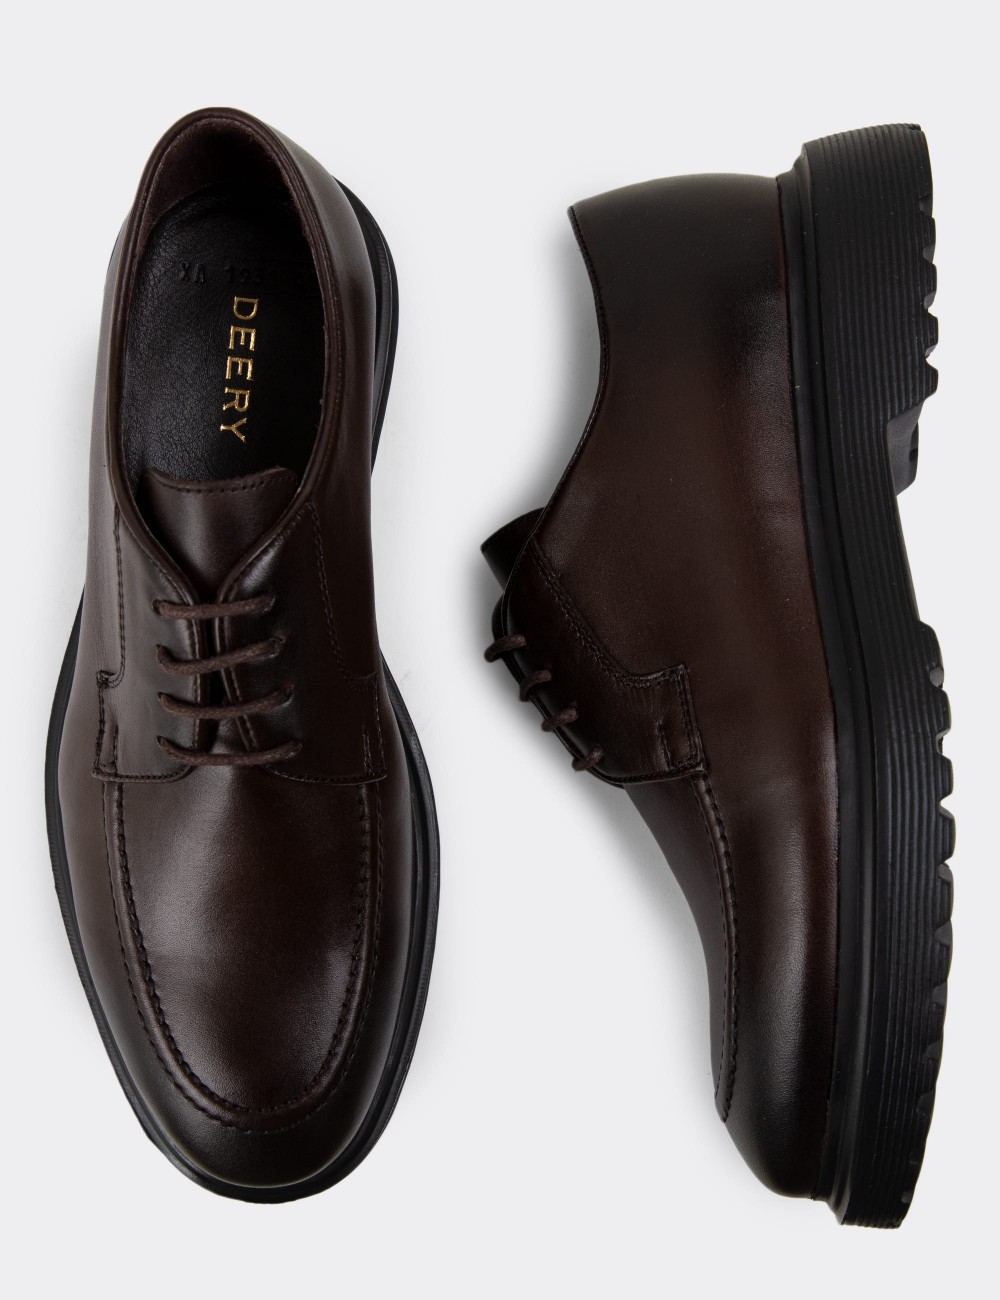 Brown Leather Lace-up Shoes - 01931MKHVE02